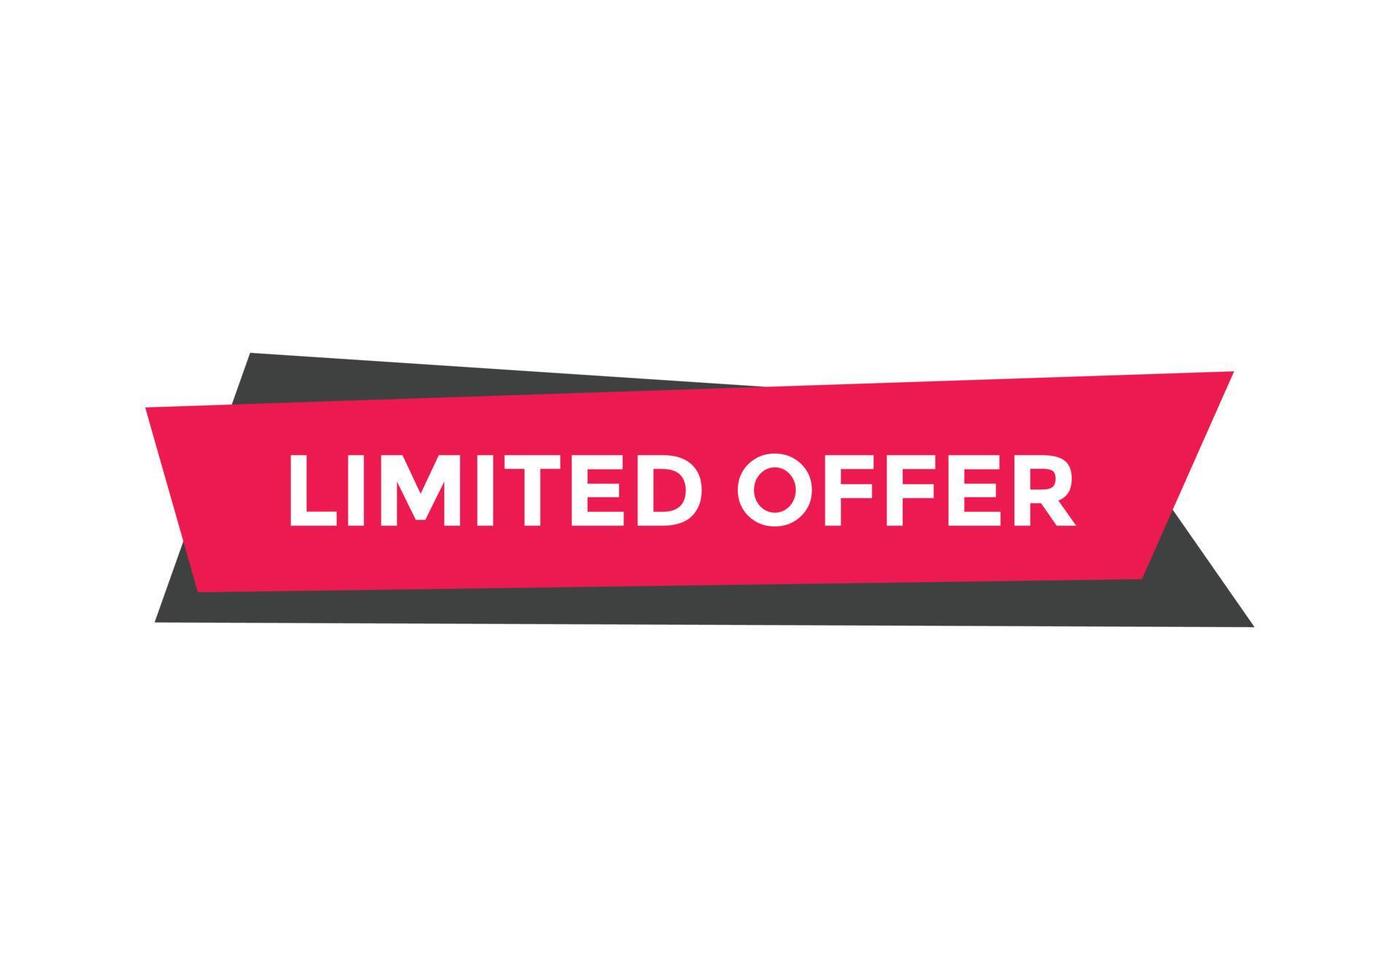 limited offer text text sign icon web button template rectangle shape vector